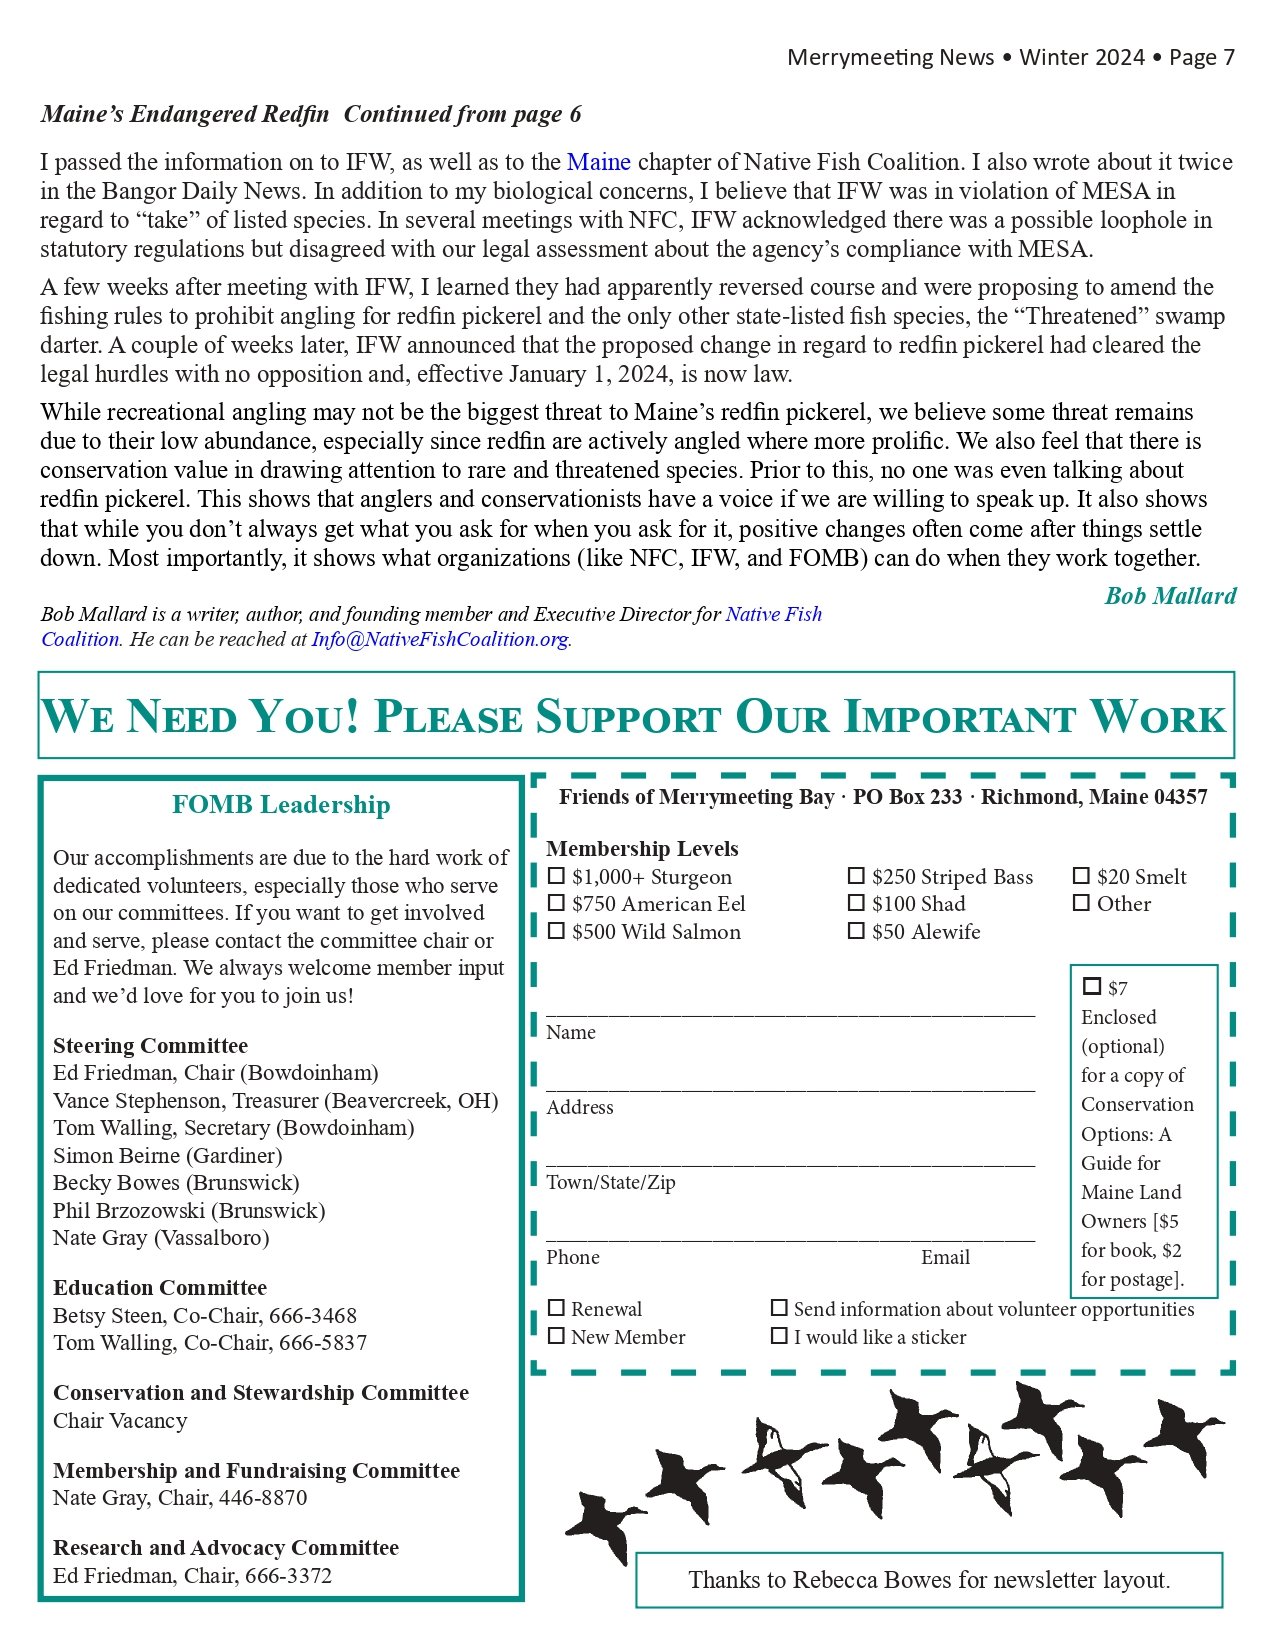 FOMB Winter 2024 Newsletter Compressed_page-0007.jpg